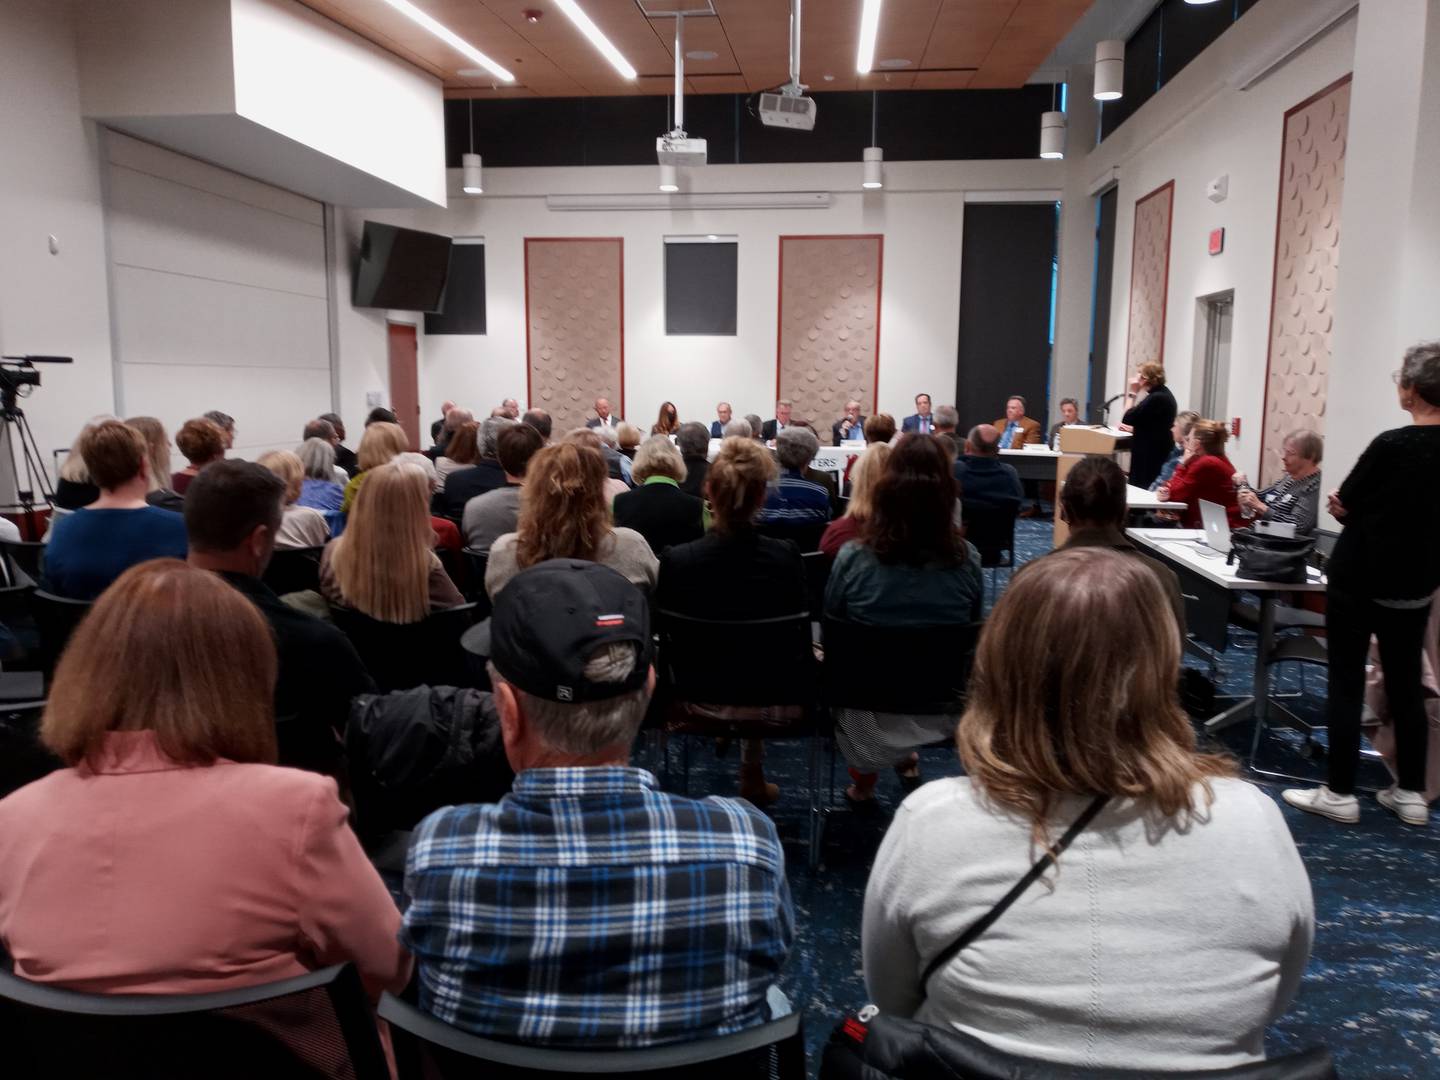 More than 50 people packed the meeting room at the Geneva Public Library Sept. 27 to hear a Kane County Board and county-wide candidates answer questions. The 
League of Women Voters of Central Kane County hosted the forum. The general election is Nov. 8.